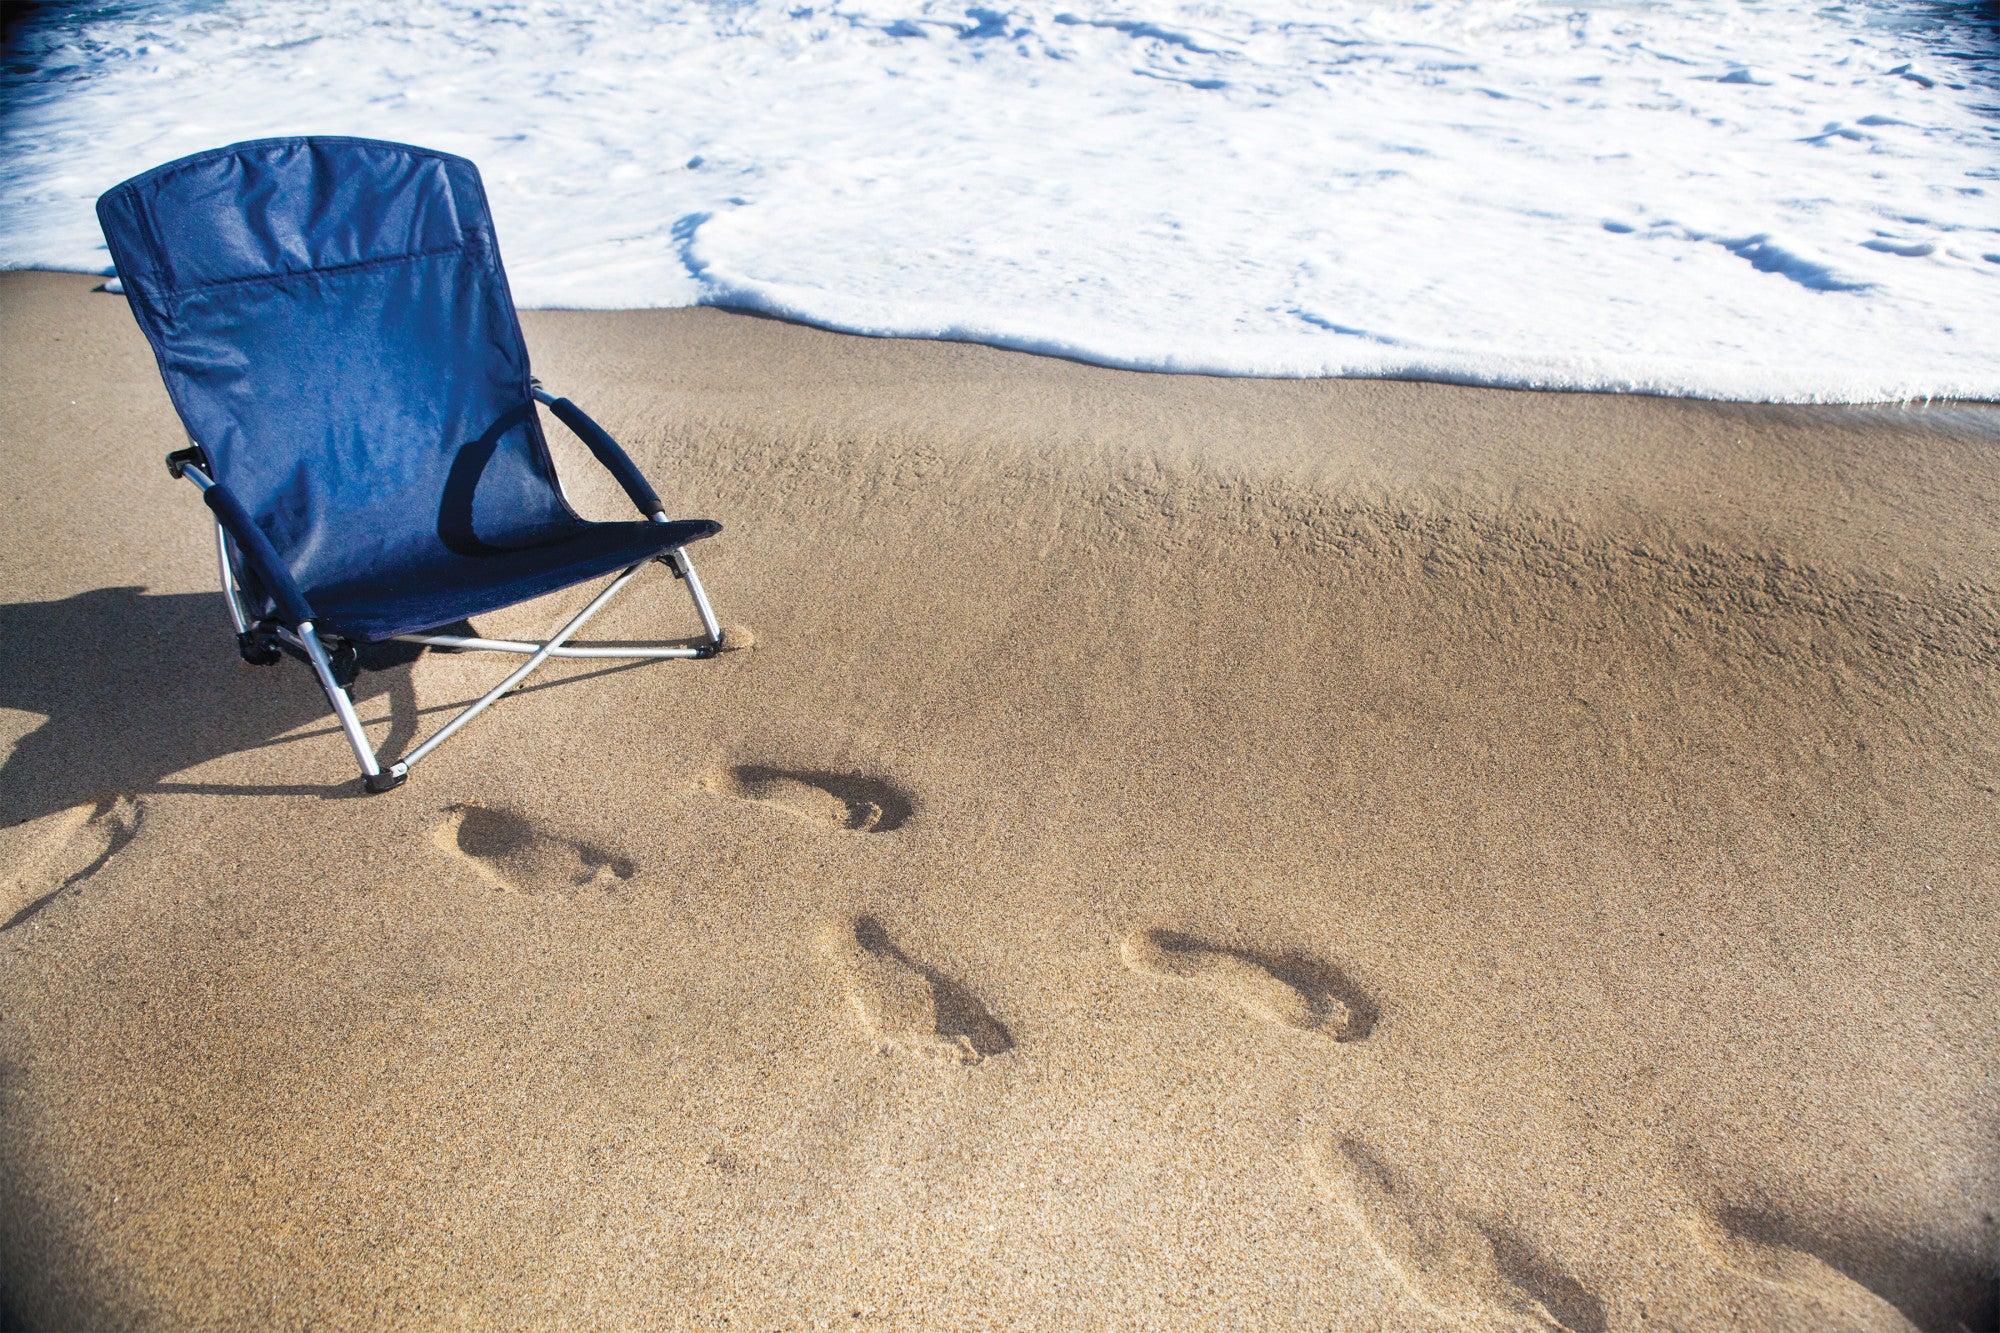 Cleveland Guardians - Tranquility Beach Chair with Carry Bag